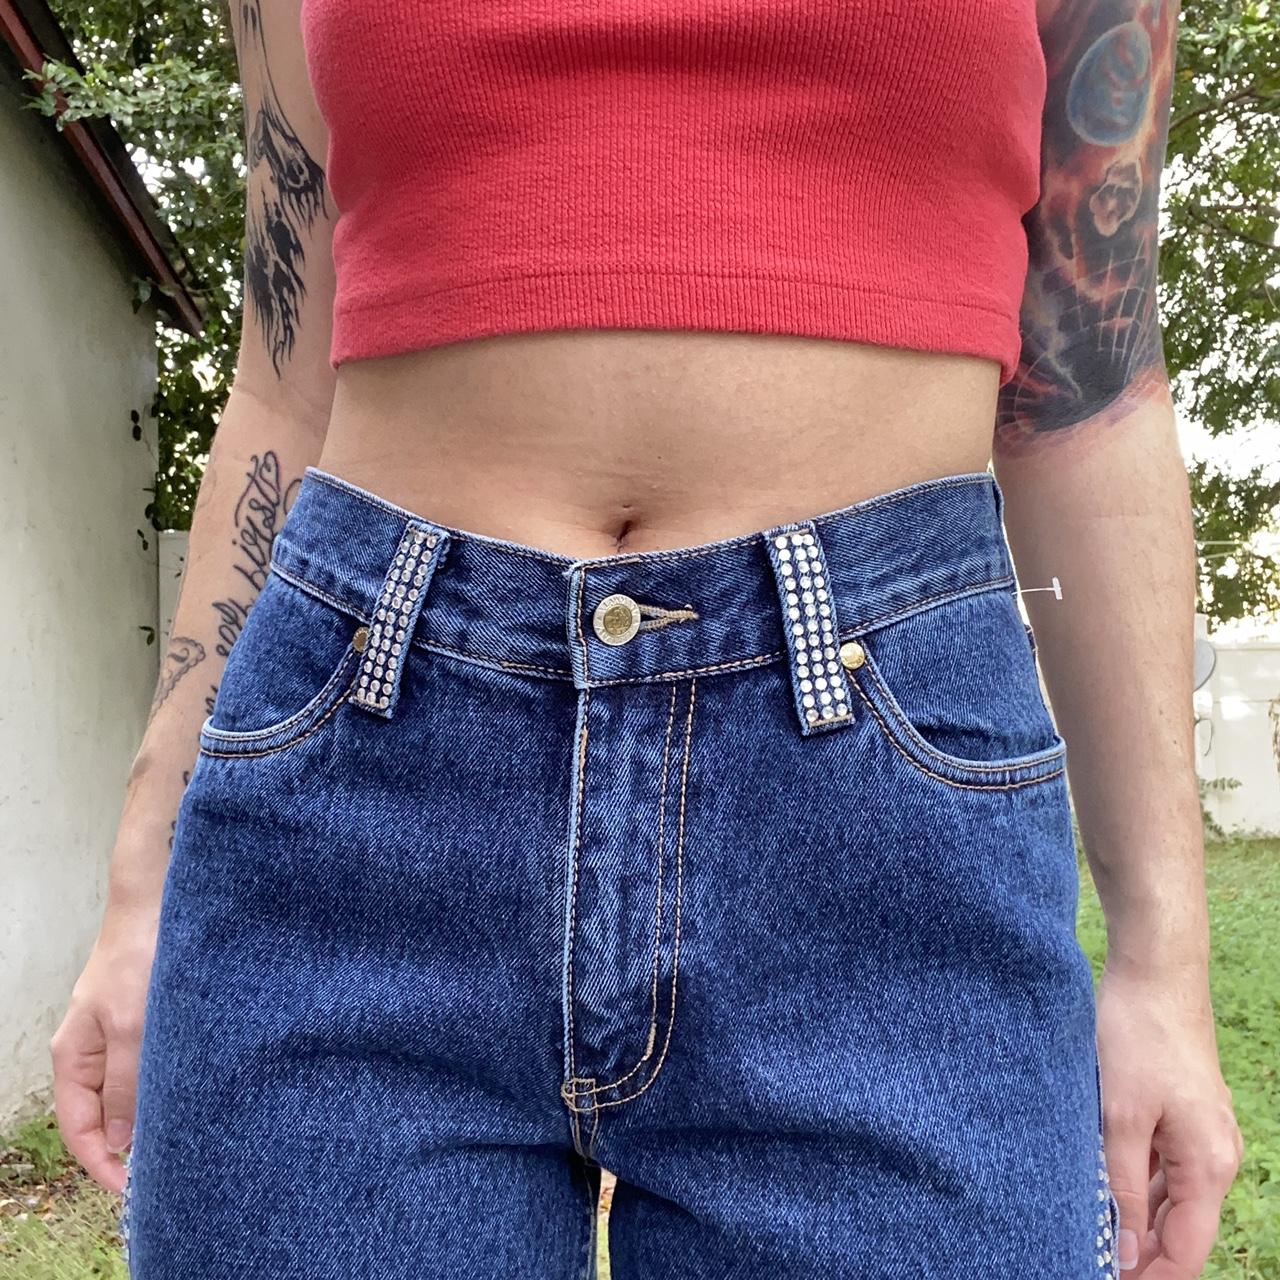 Lady Luck will be on your side with this vintage - Depop